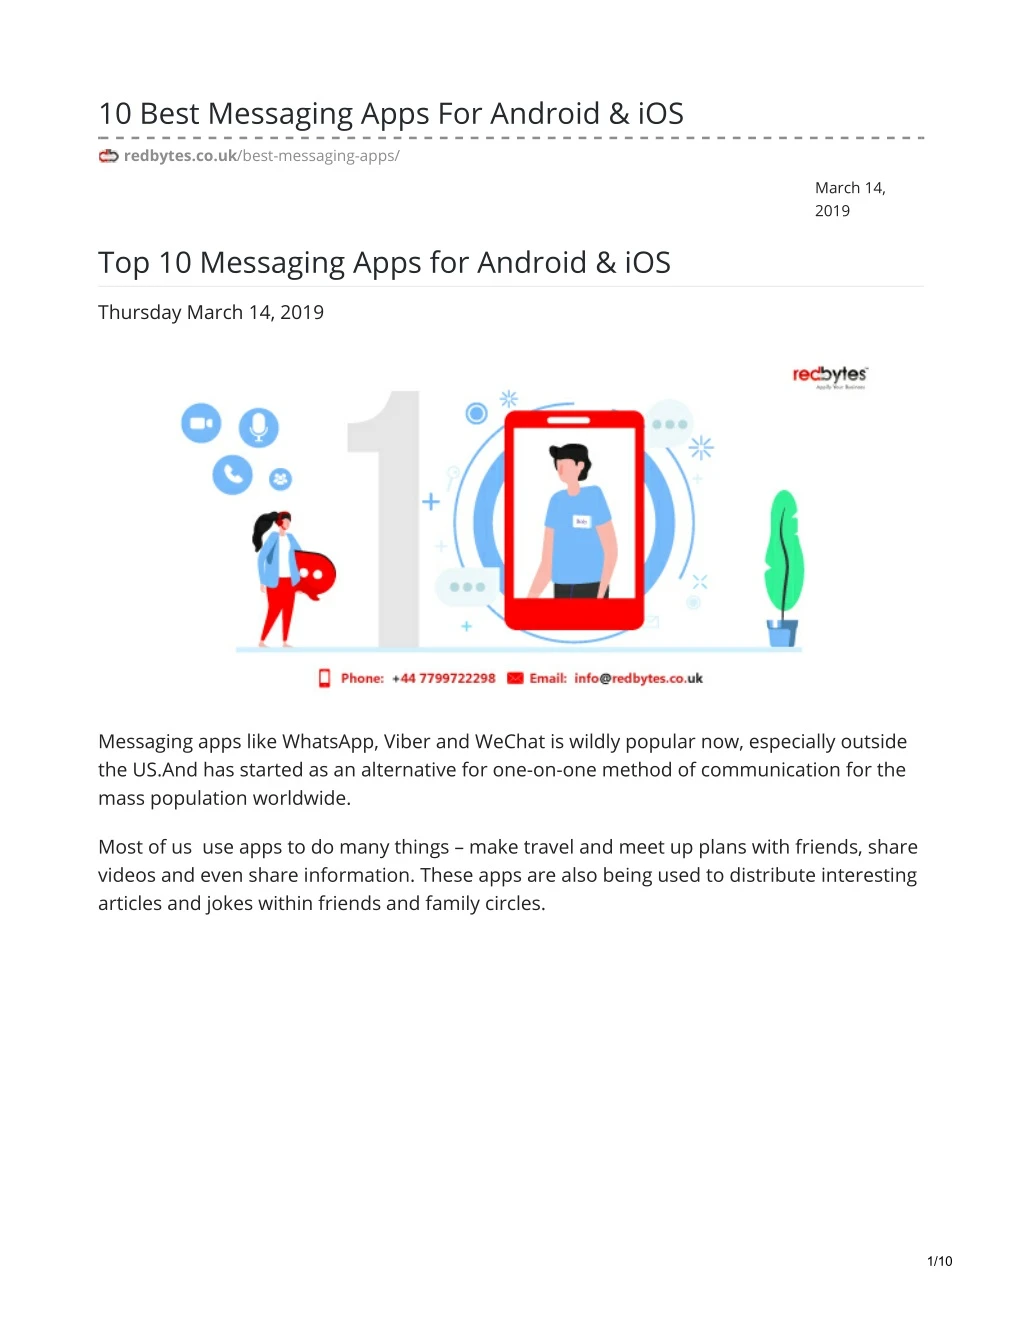 10 best messaging apps for android ios